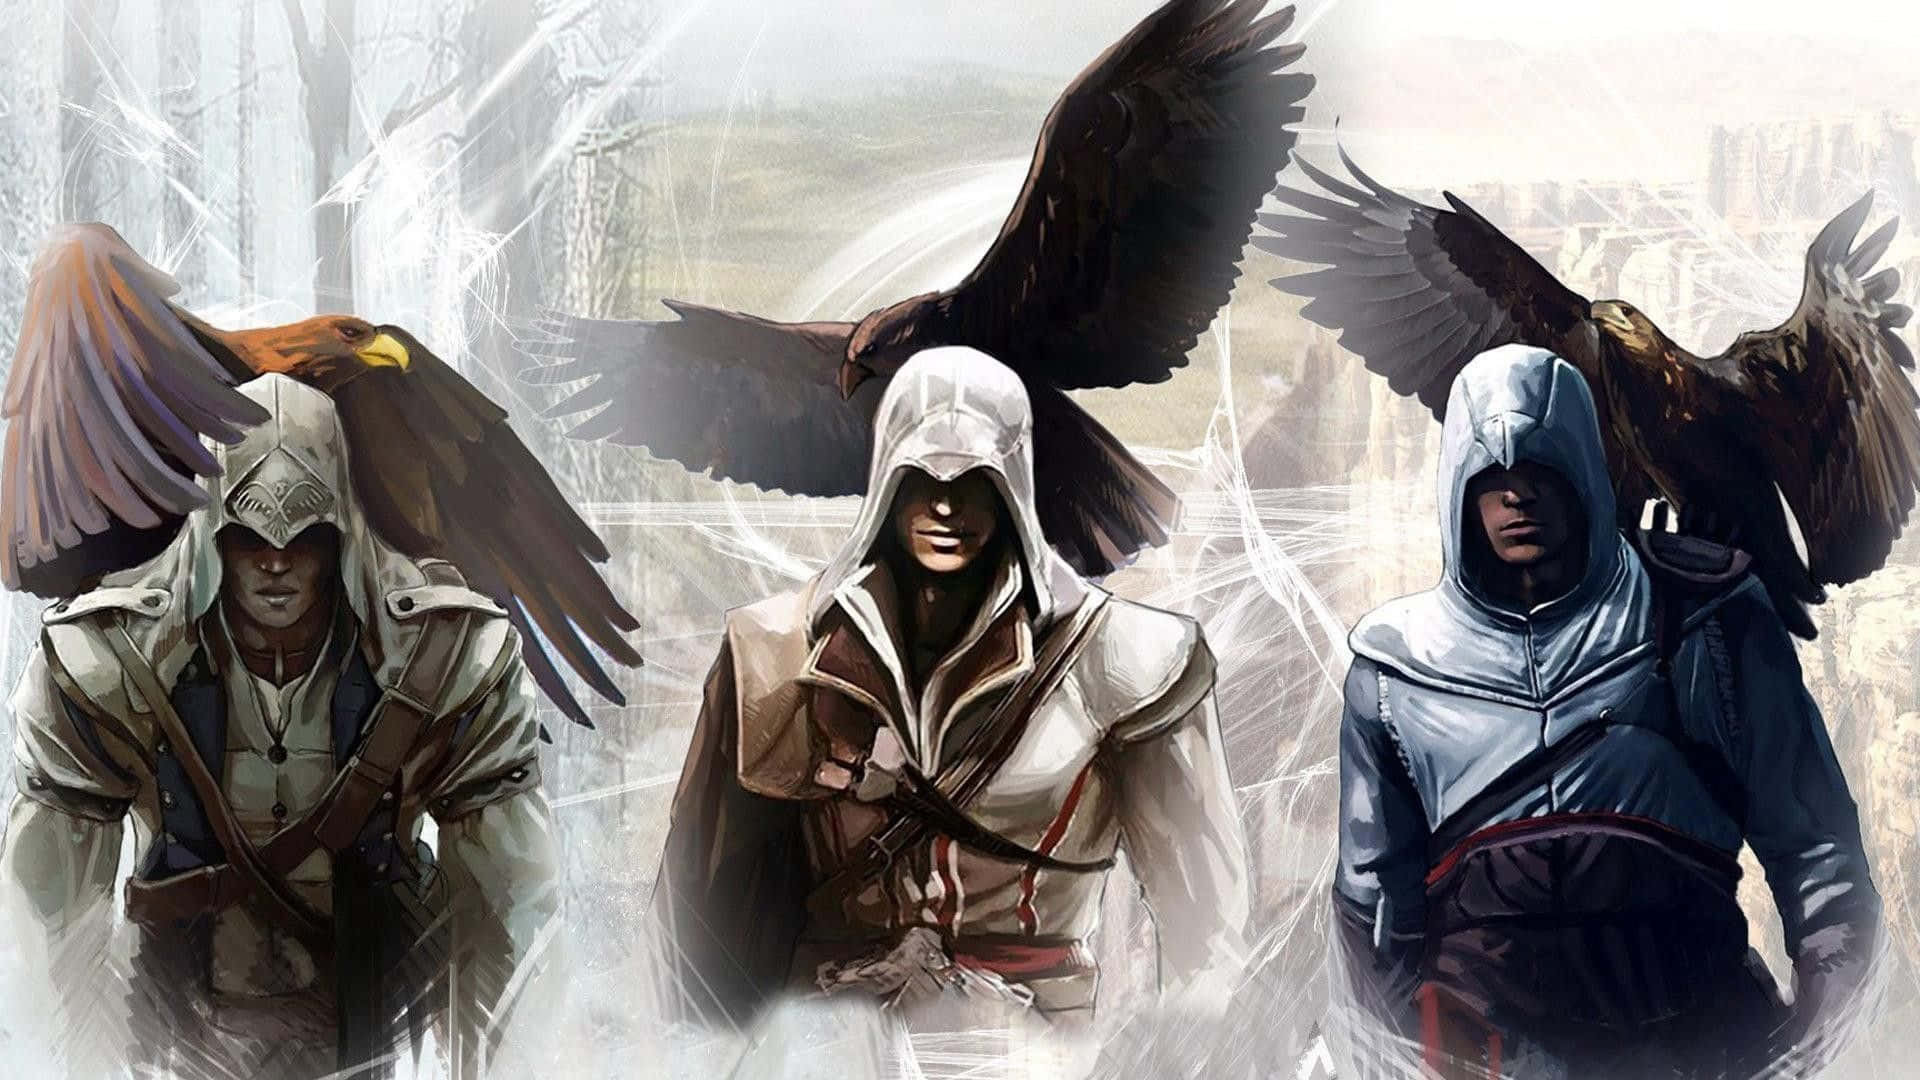 Ezio Auditore in Assassin's Creed Brotherhood Action Sequence Wallpaper